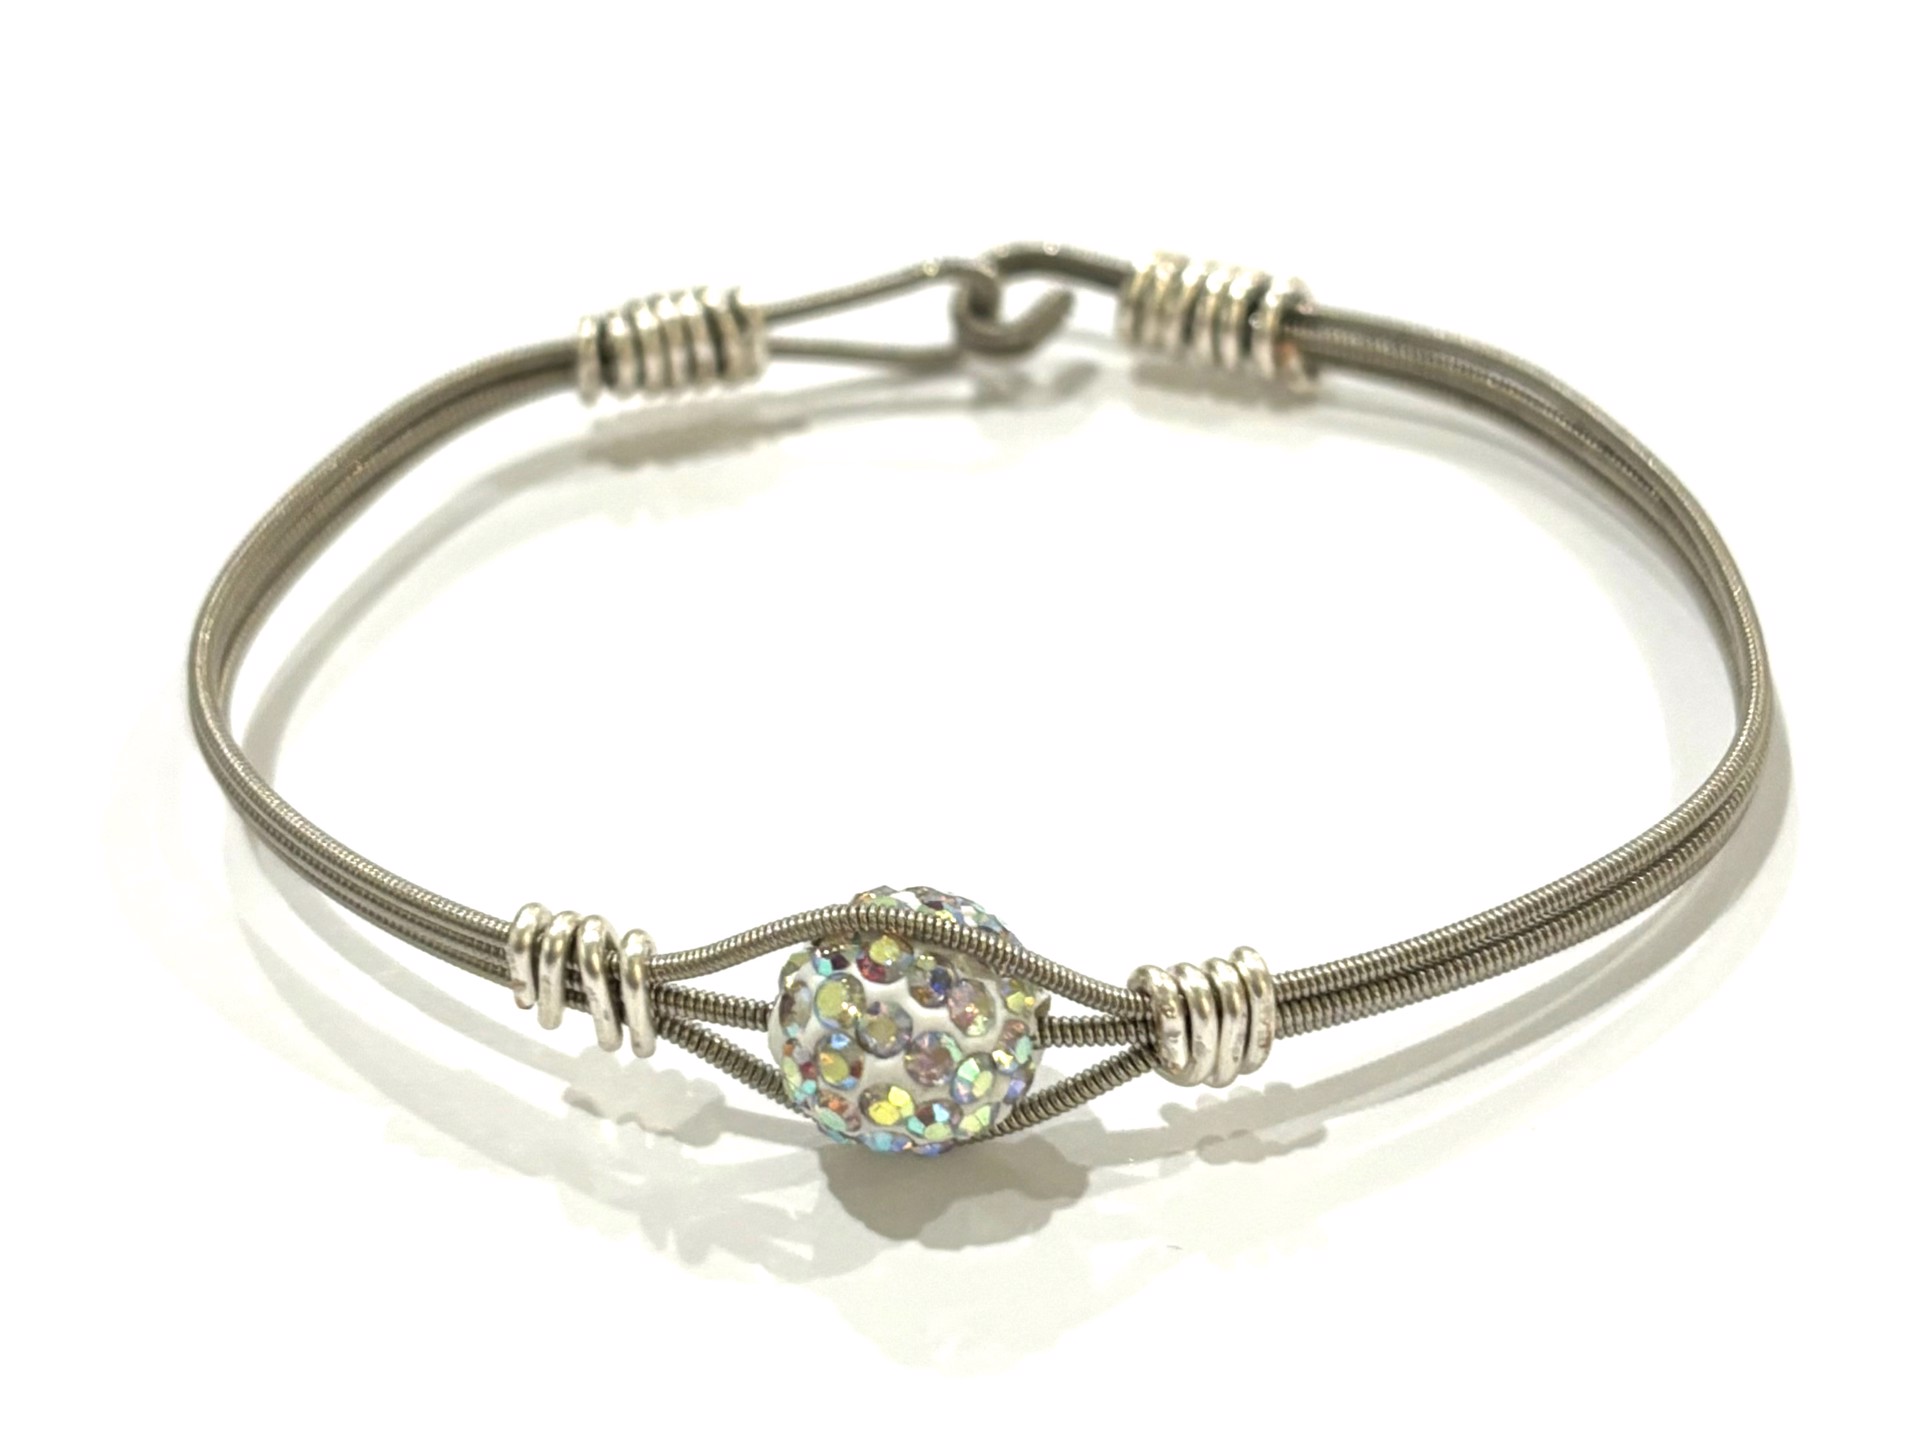 Sparkle Bead Guitar String Bracelet by String Thing Designs